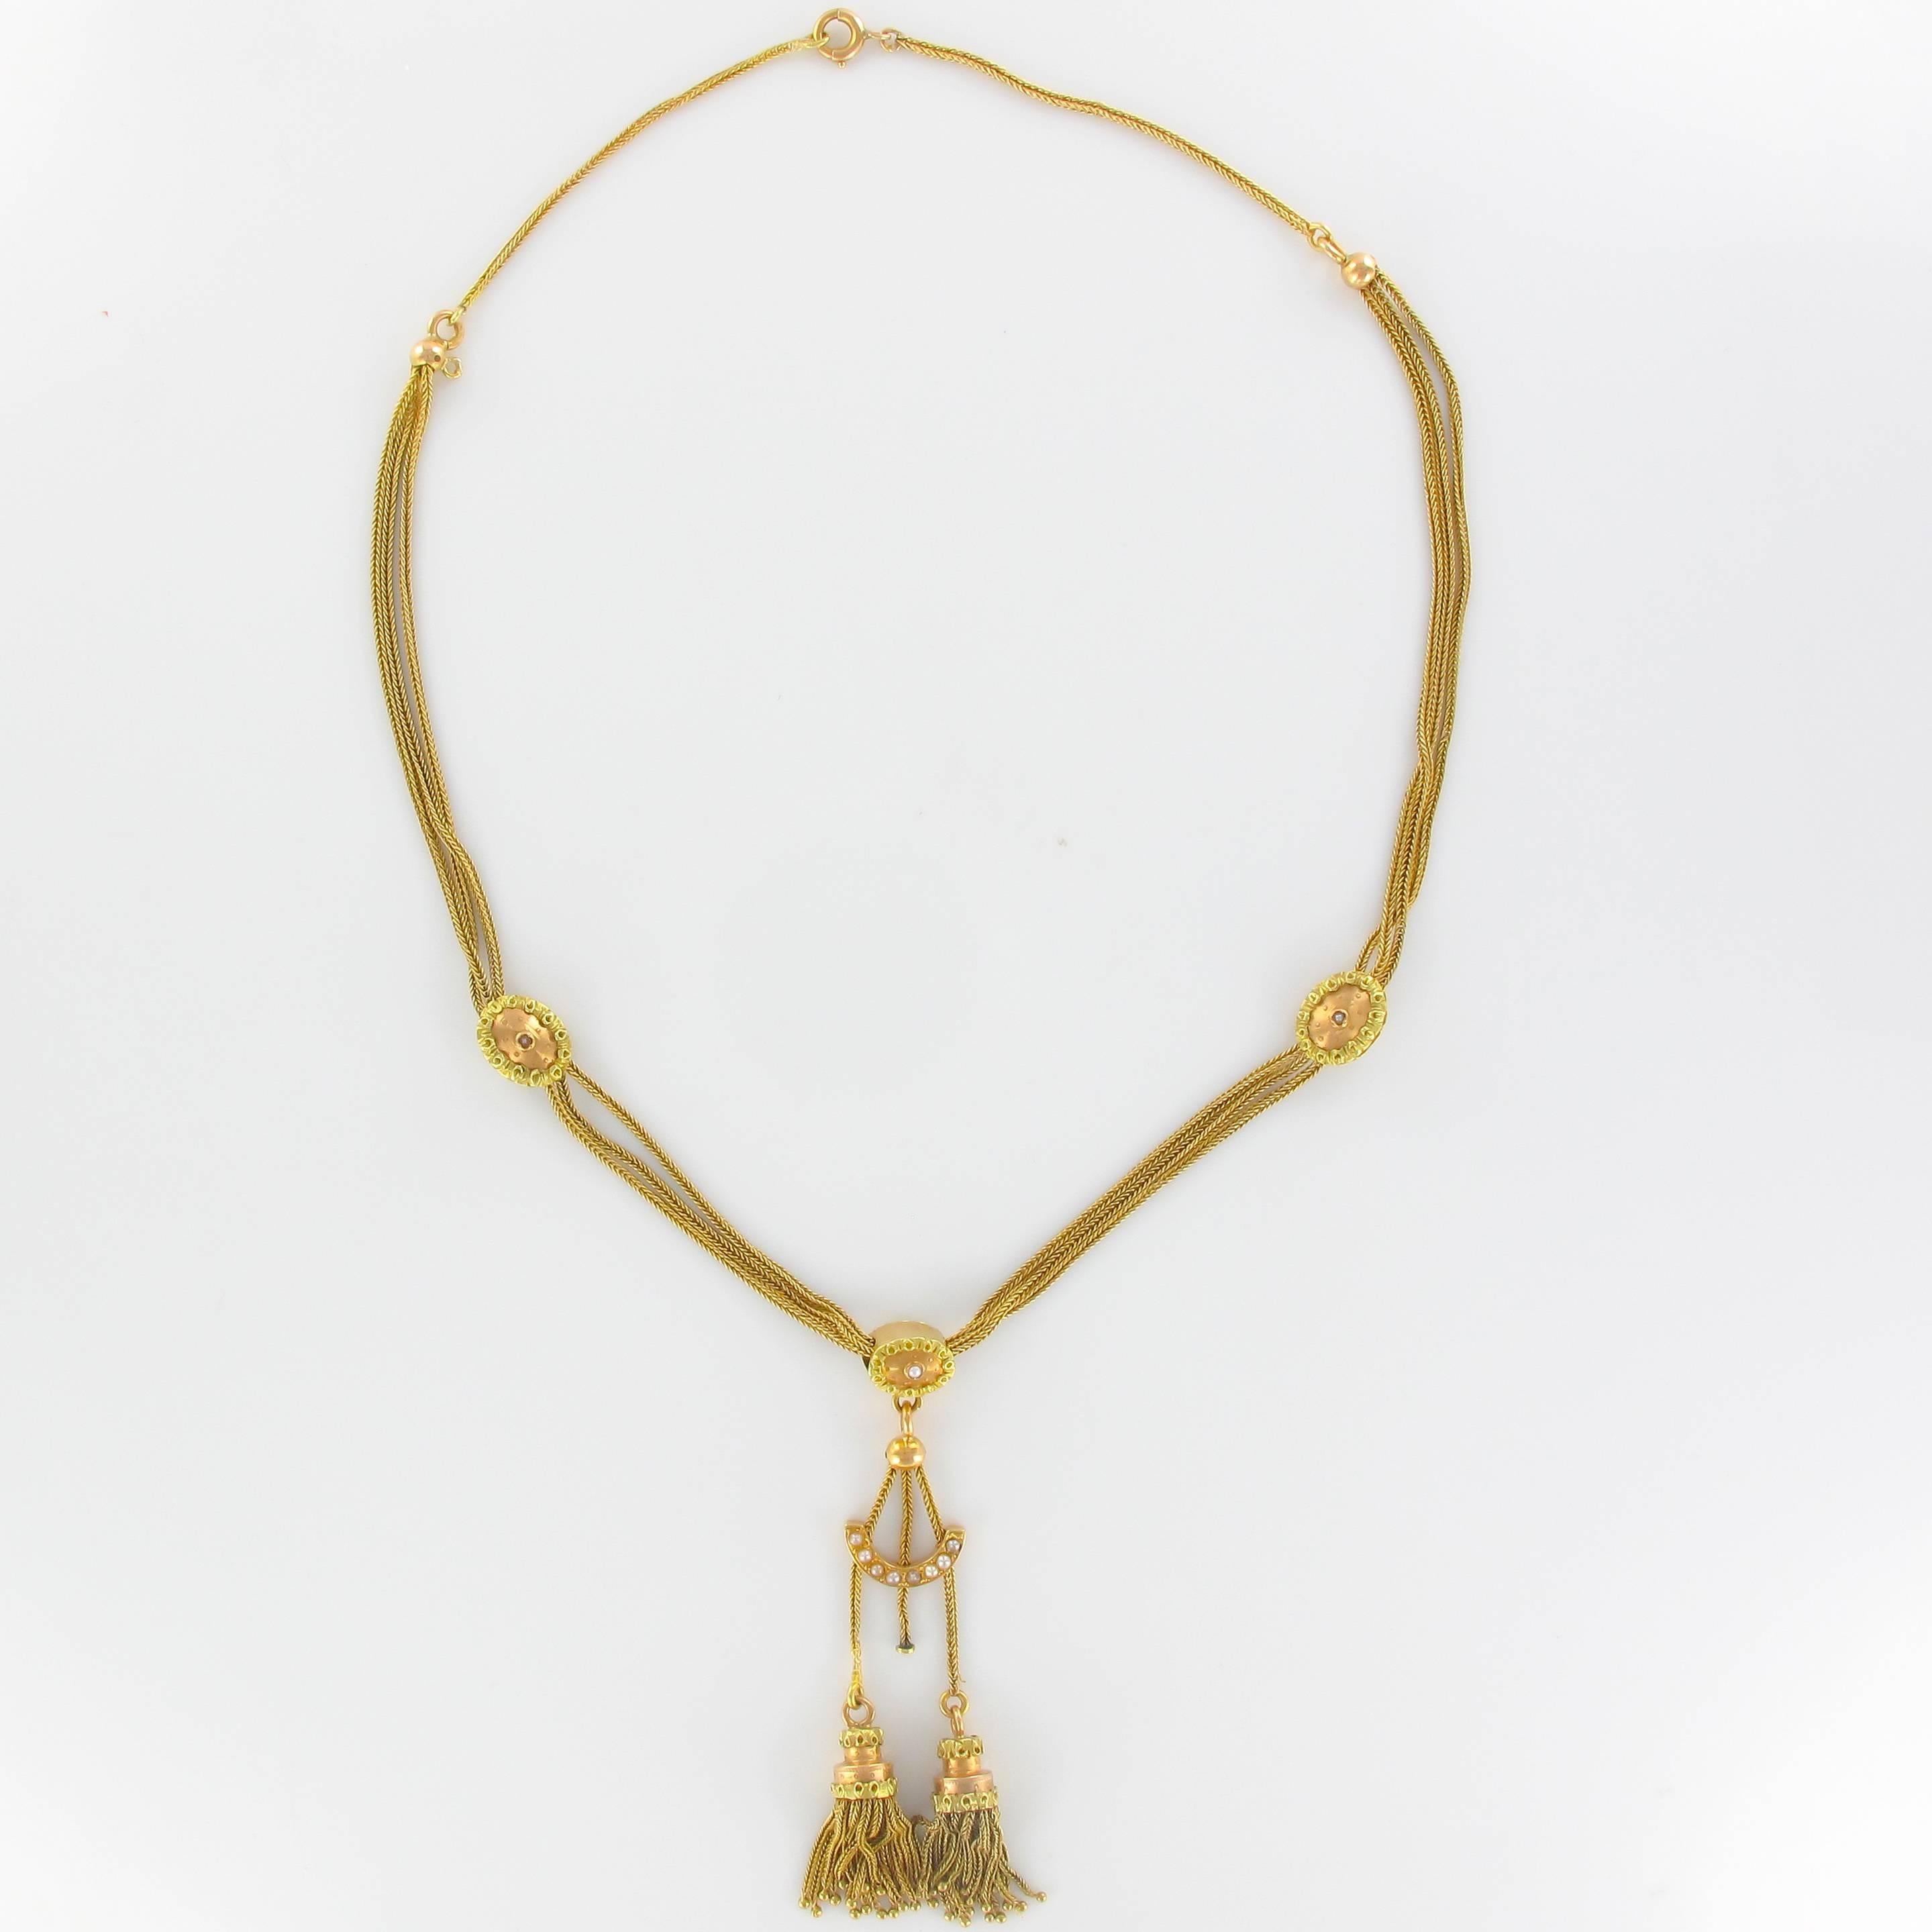 Napoleon III Antique Gold Suspended Type Necklace with Fine Pearls